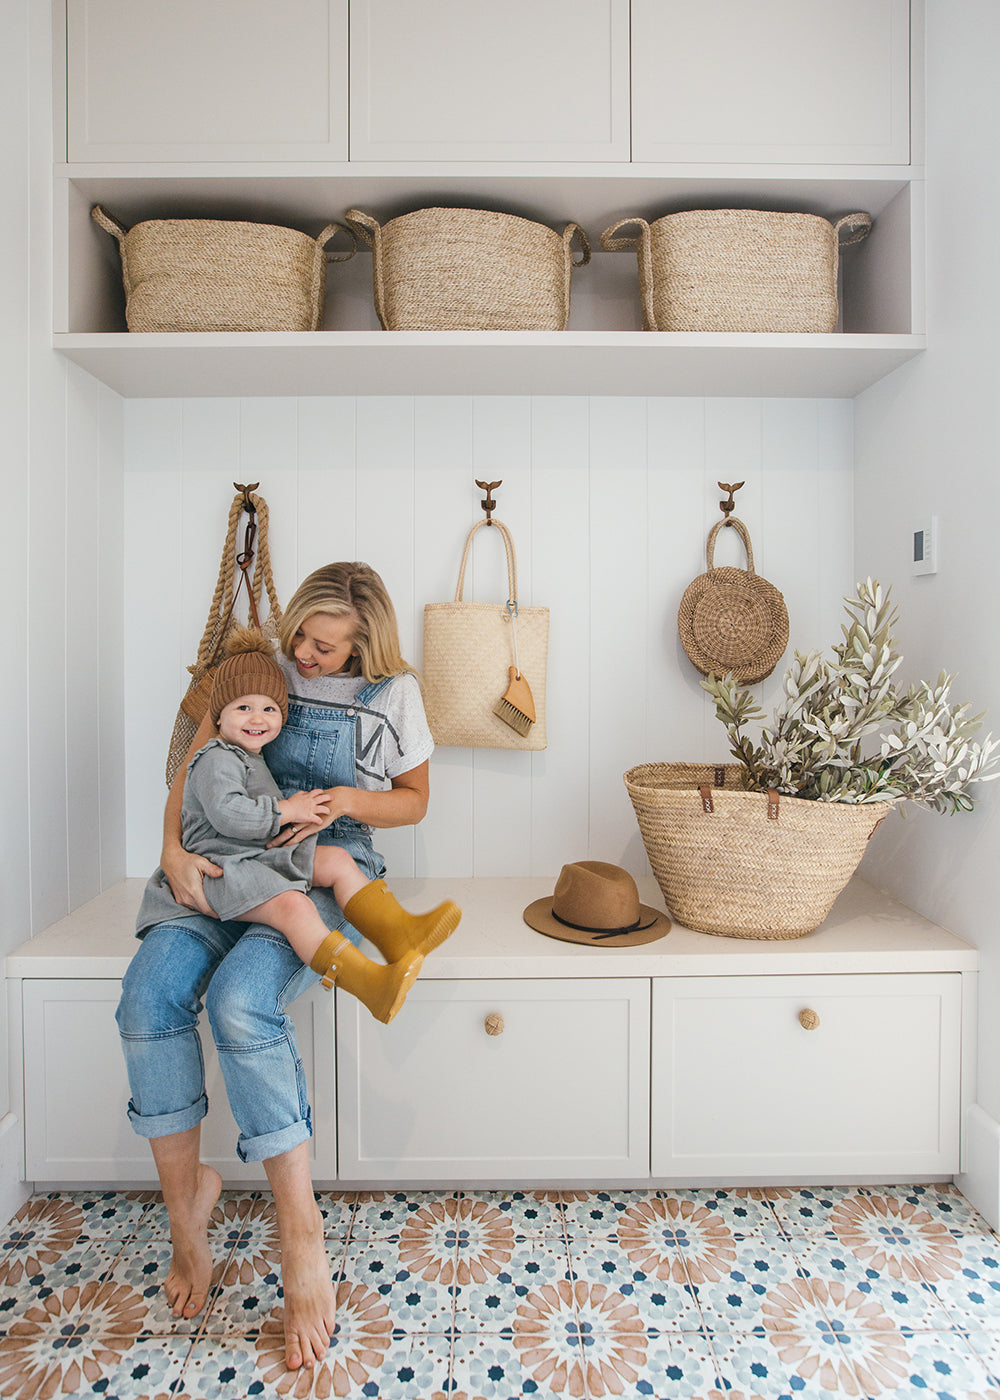 Woven baskets in Kara Demmrich's mudroom. Kara & her son playing in the foreground. 